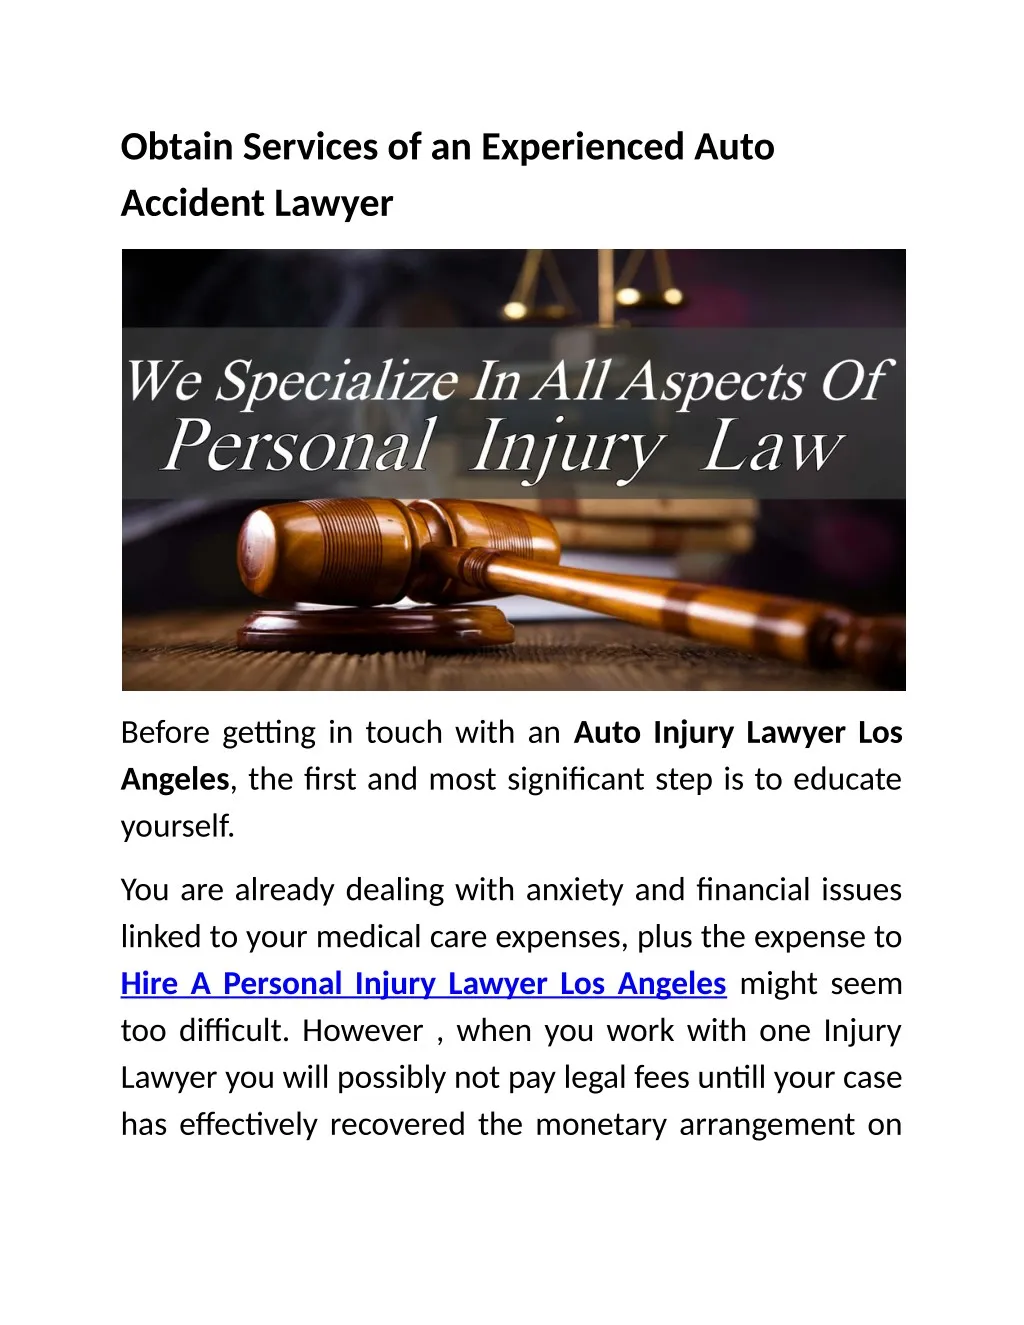 obtain services of an experienced auto accident